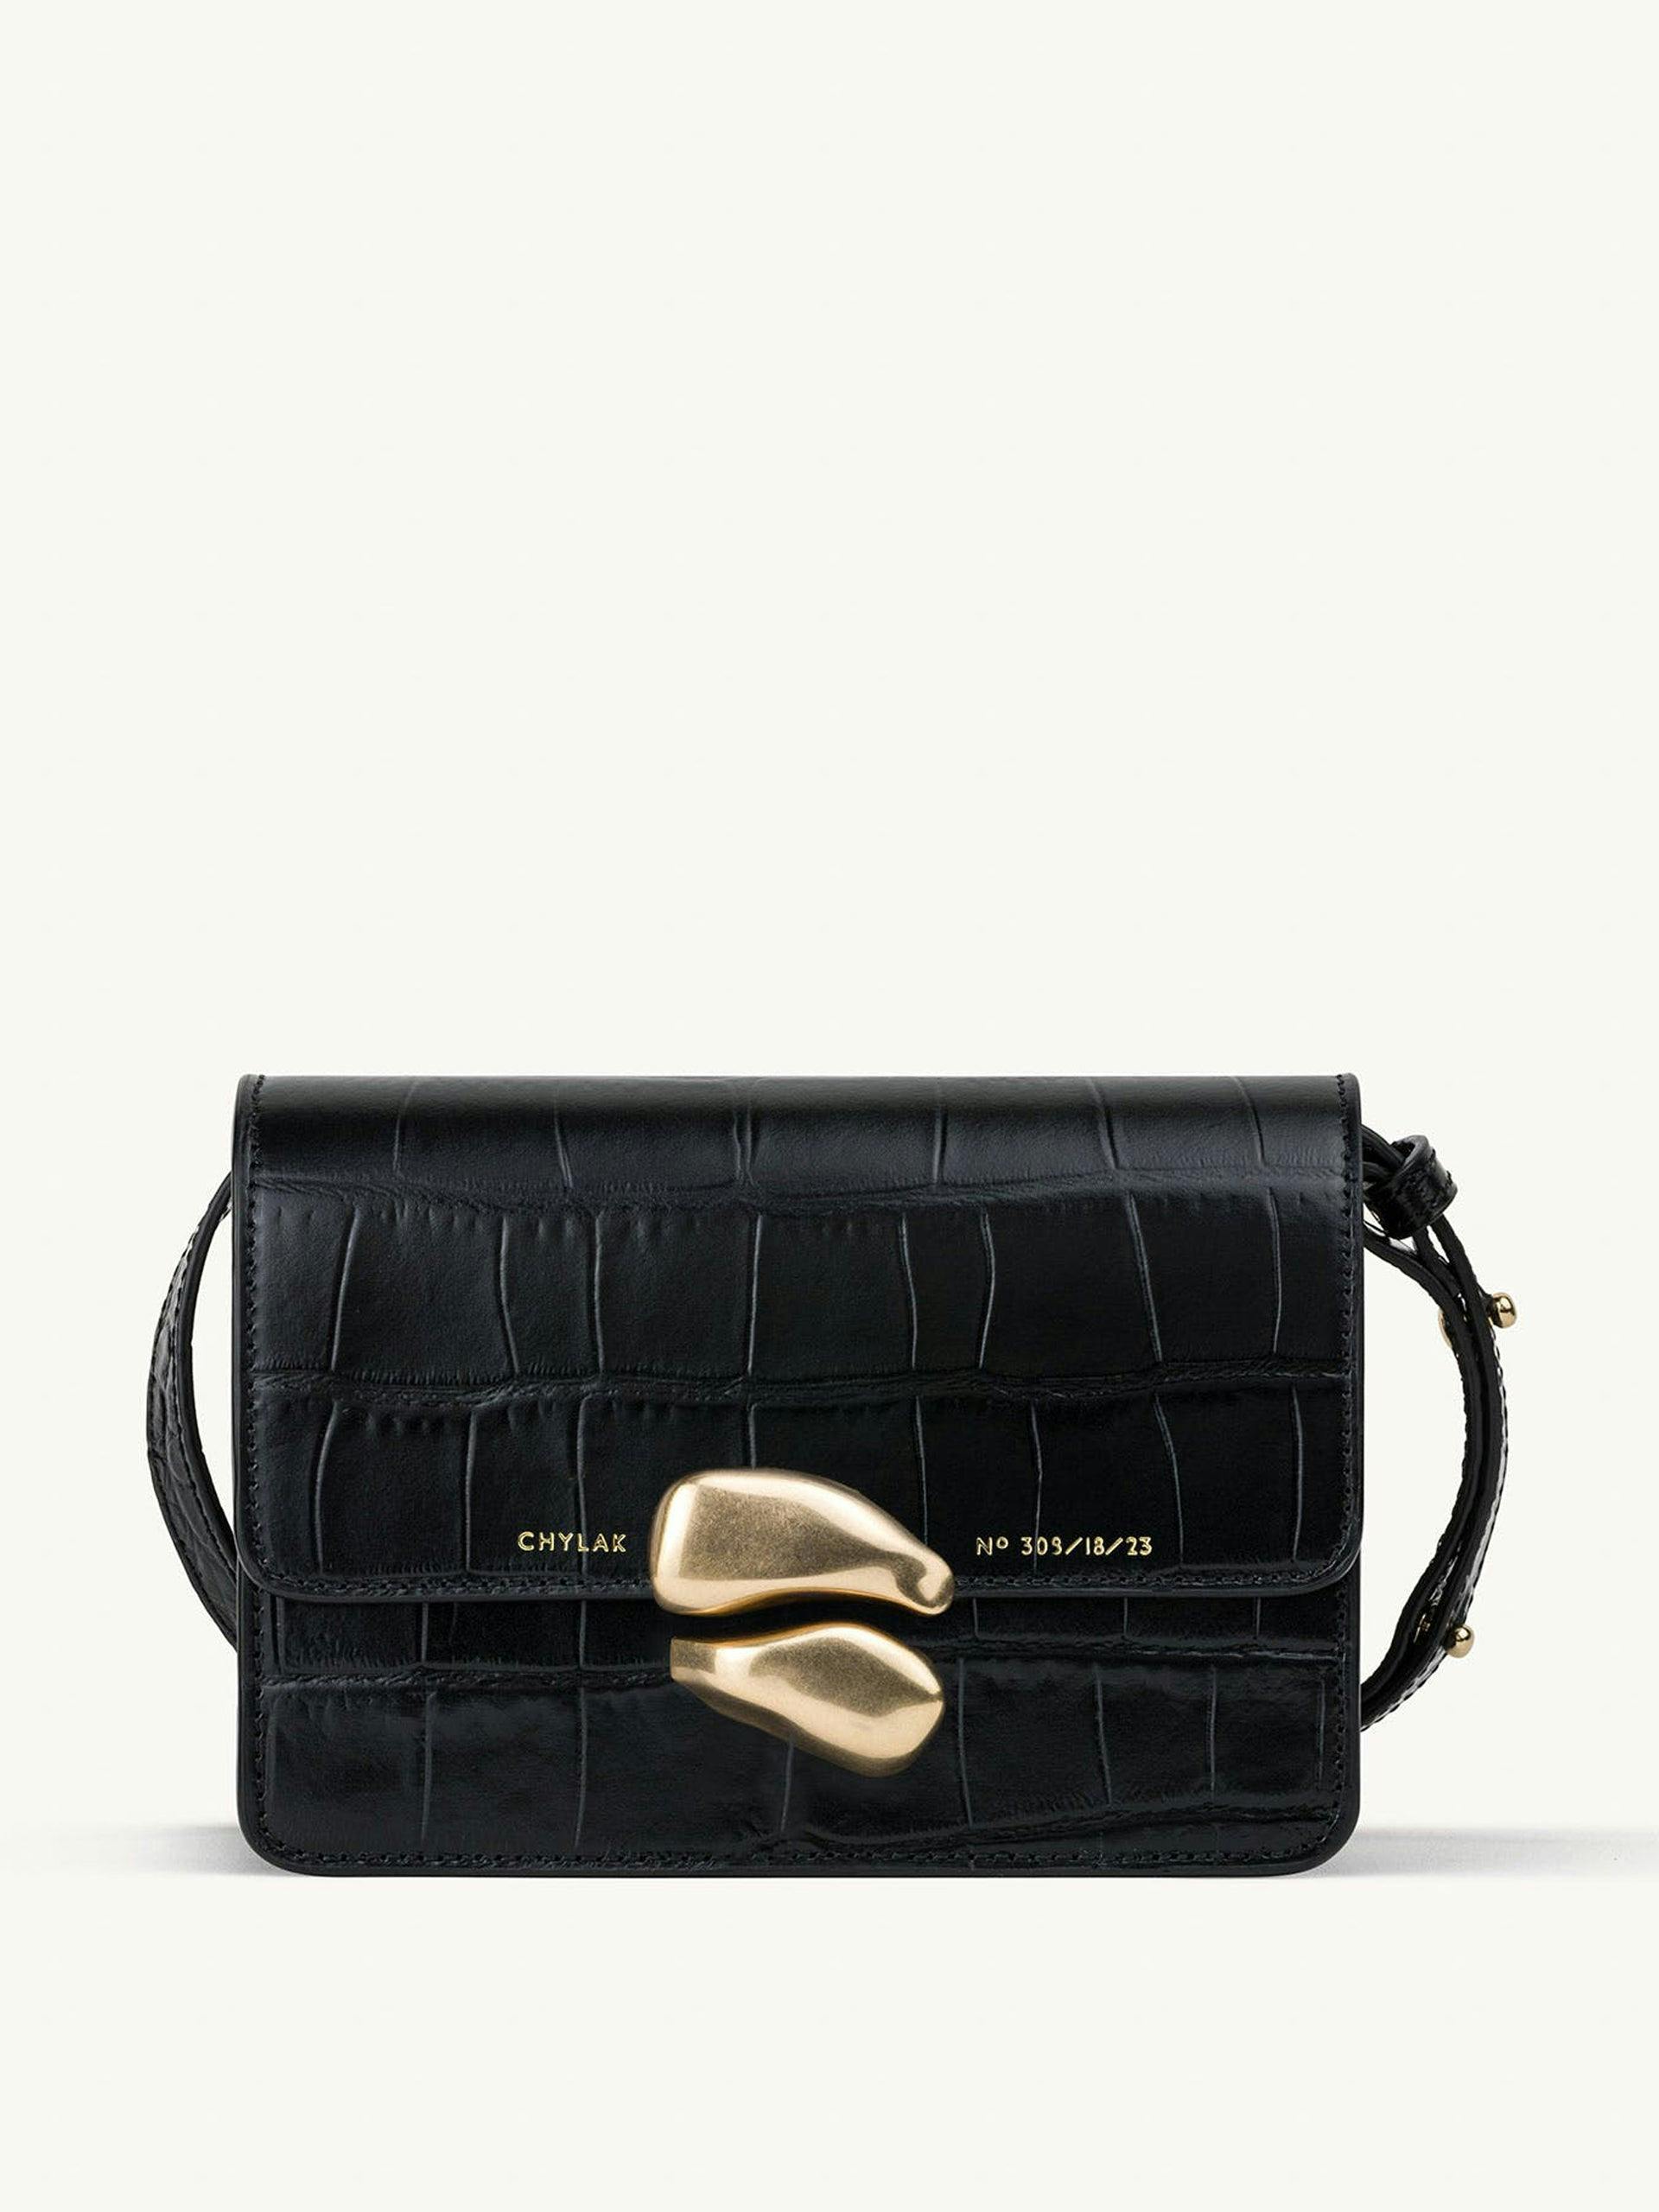 Black mini leather bag with gold sculptural seal